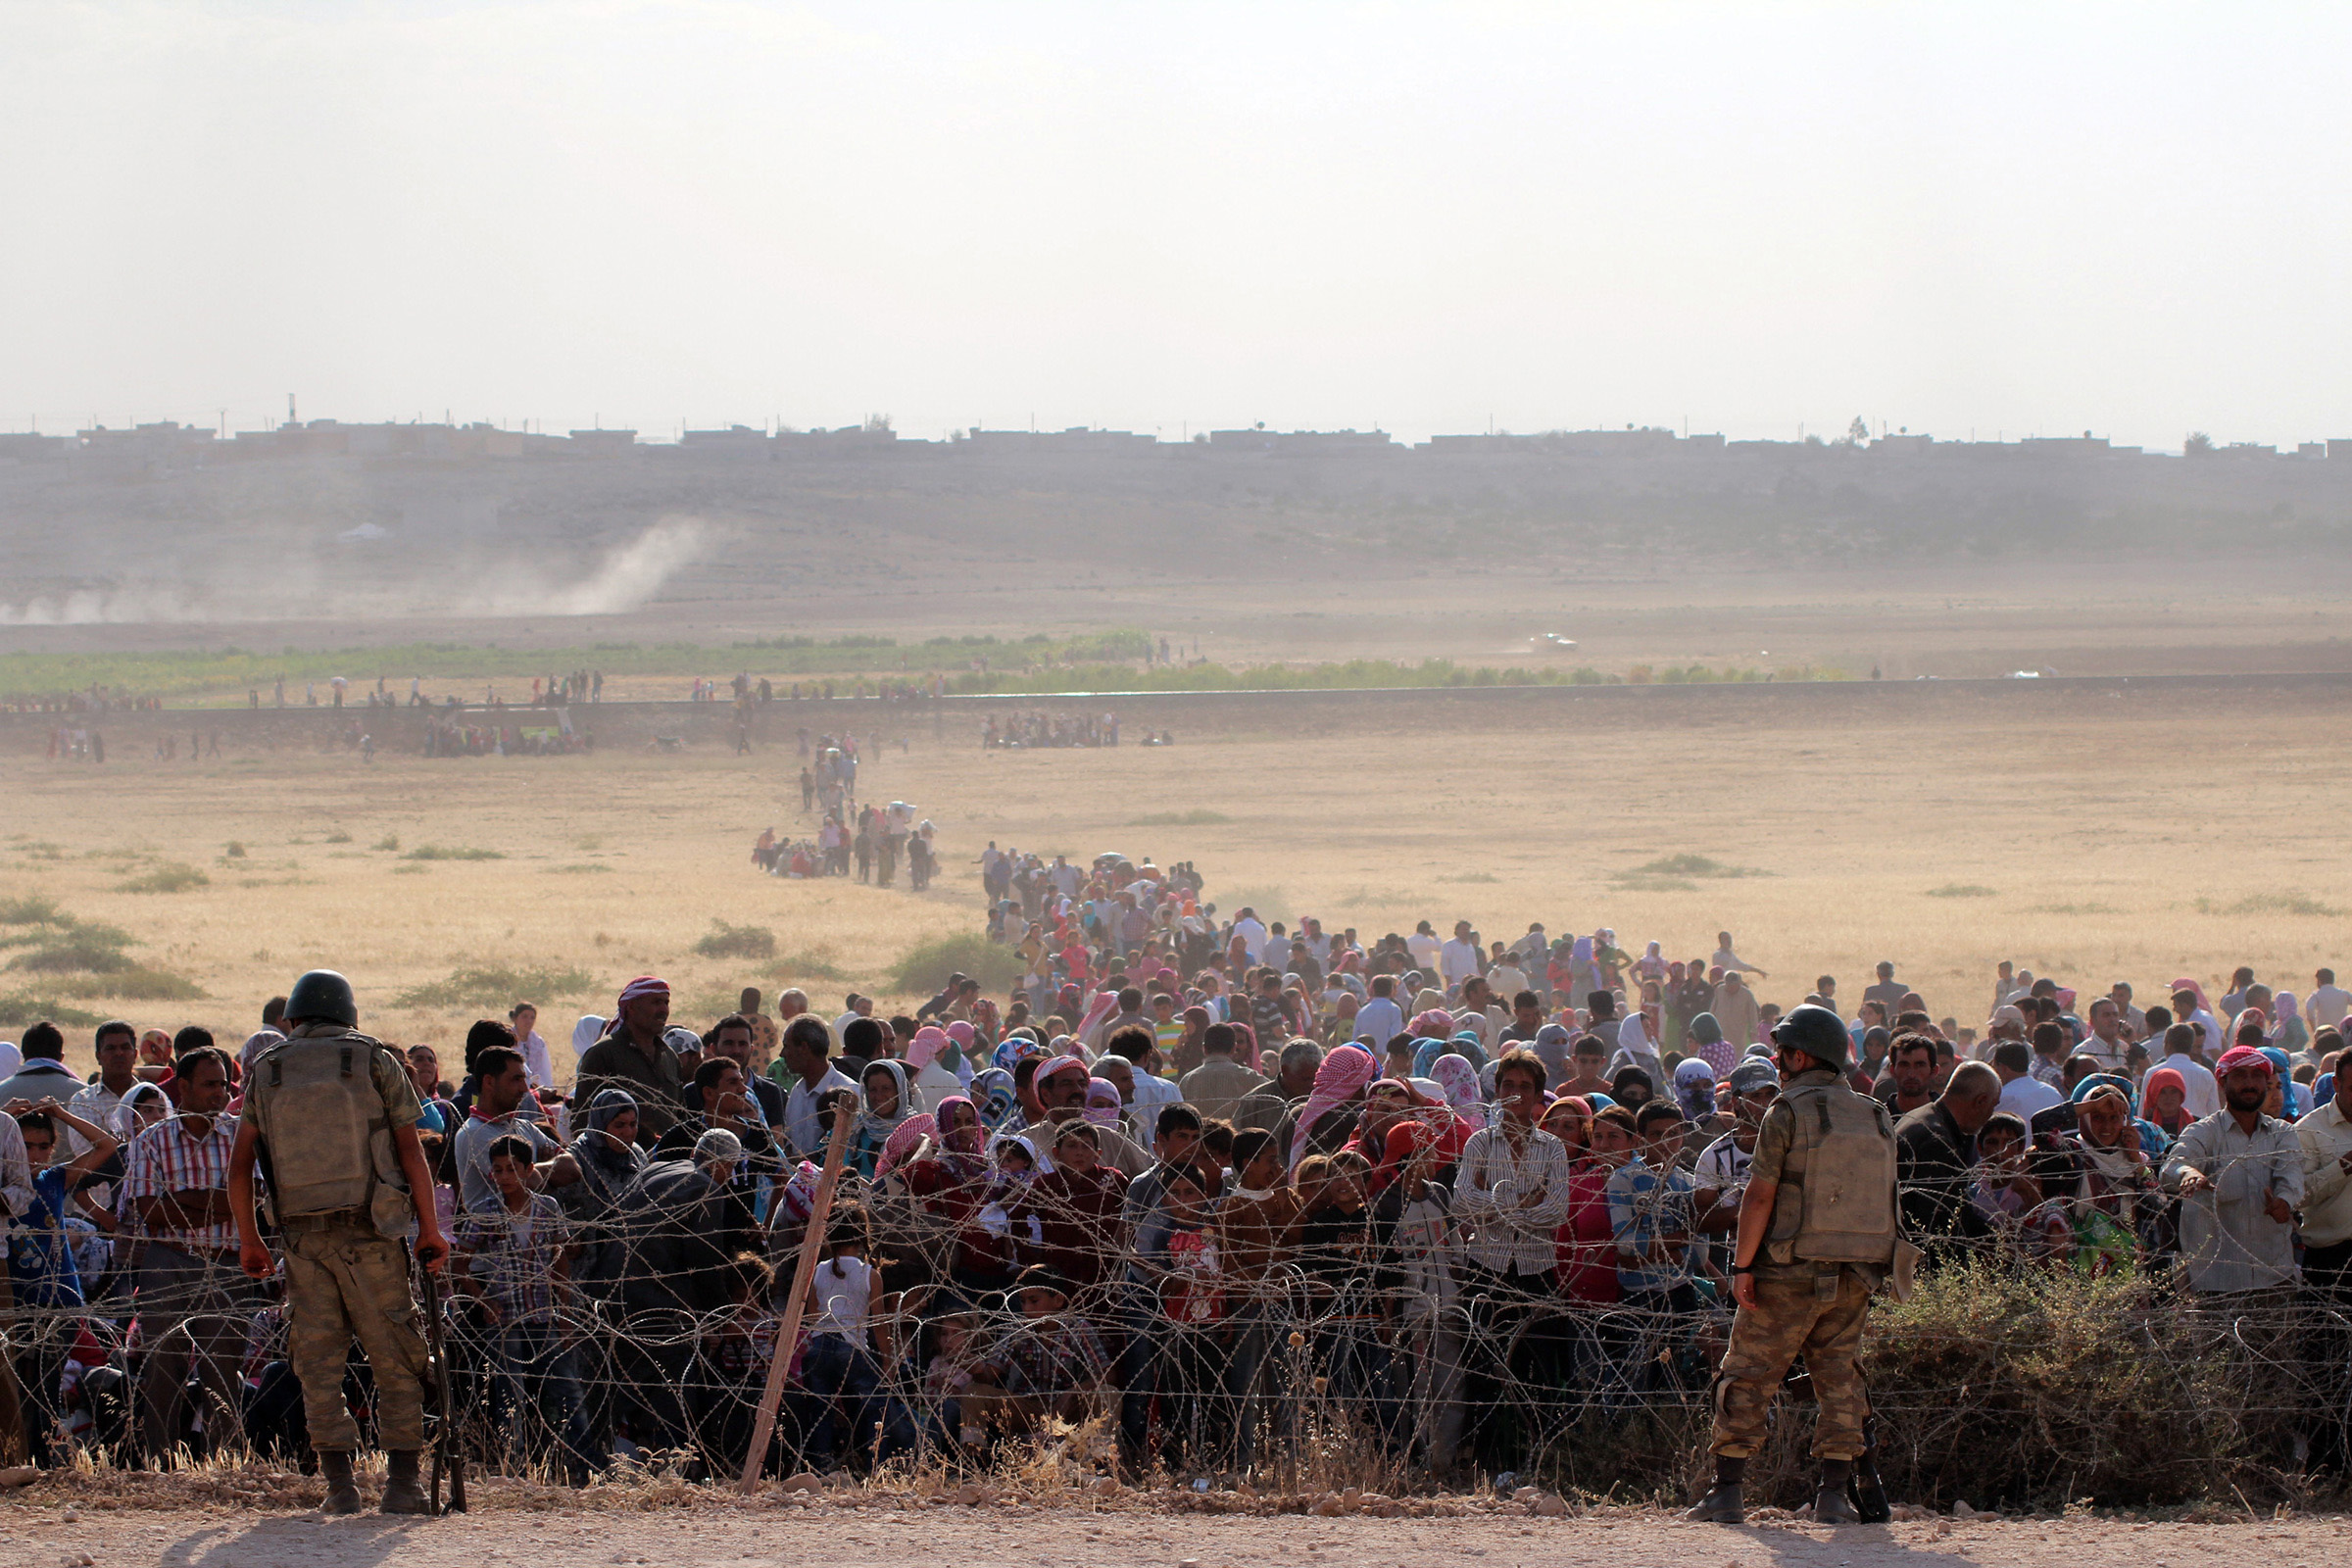 Syrians fleeing from clashes between the Islamic State of Iraq and Syria (ISIS) militants wait at the Turkish-Syrian border to cross into Turkey on Sept. 18, 2014. (Halil Fidan—Anadolu Agency/Getty Images)